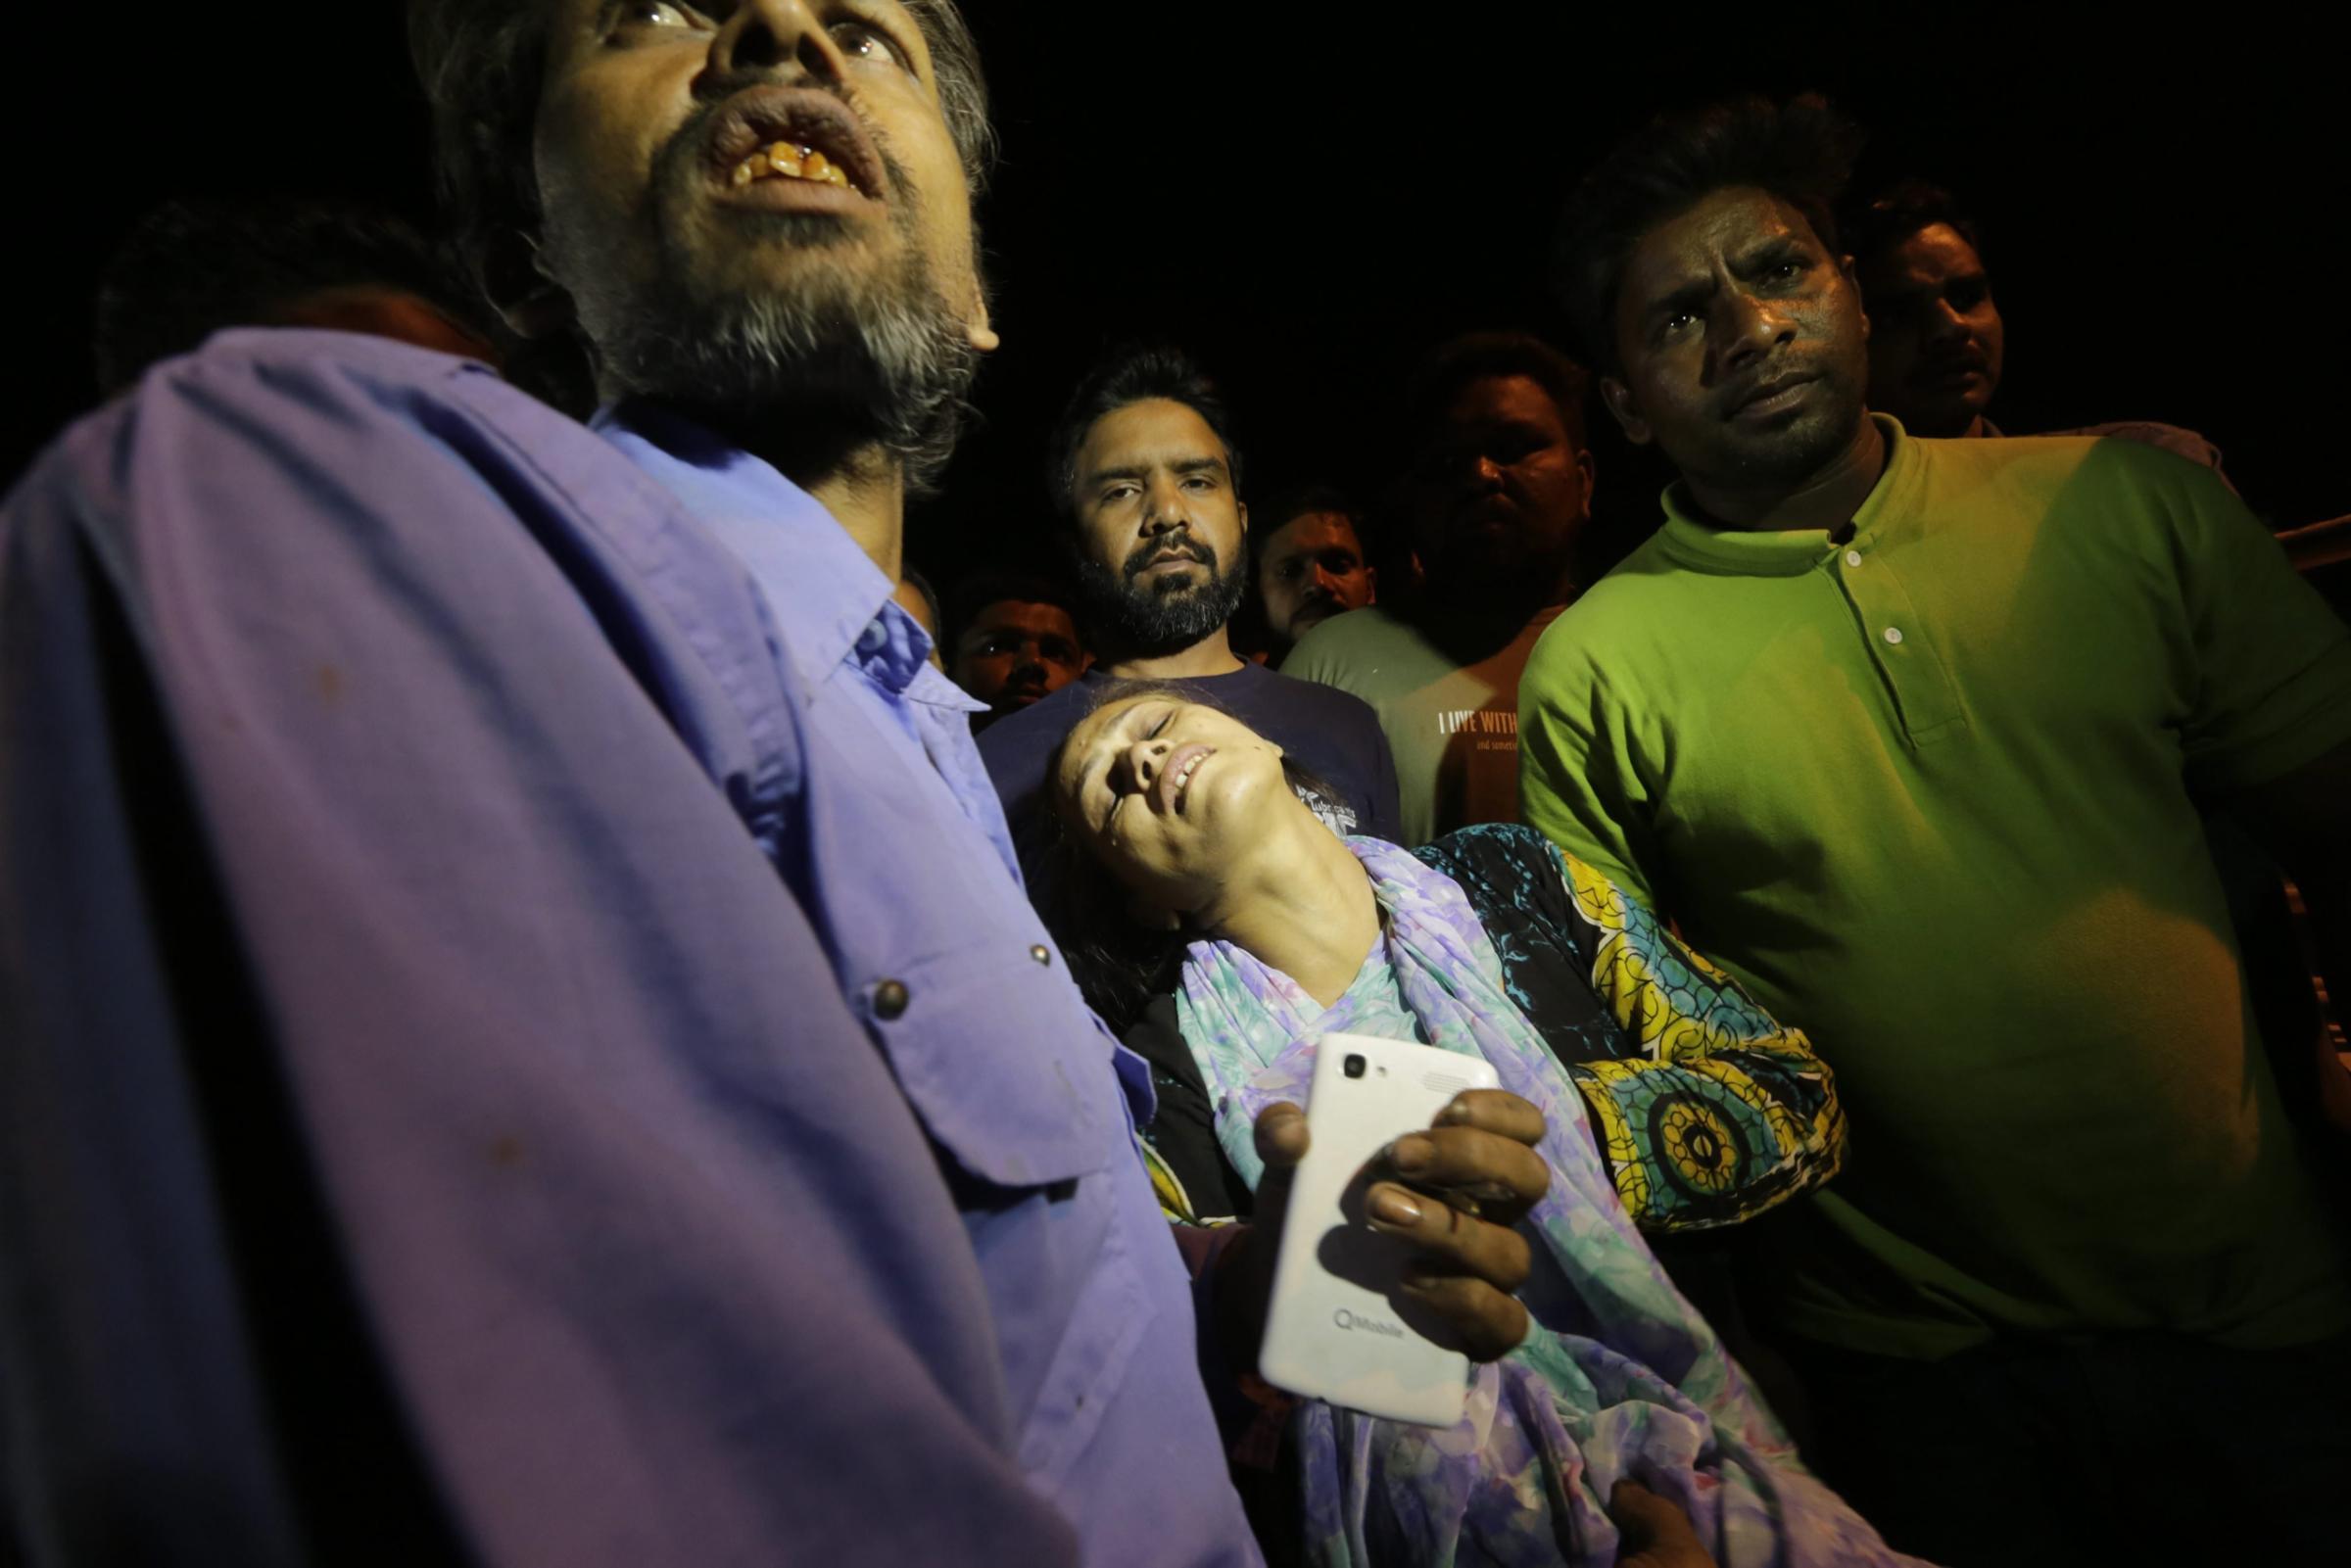 epa05232898 Relatives of the victims of a suicide bomb blast cry outside a hospital in Lahore, Pakistan, 27 March 2016. At least 52 people inlcuding women and children were killed while dozens injured in a suicide bomb attack that targeted a recreational park in Lahore. EPA/RAHAT DAR